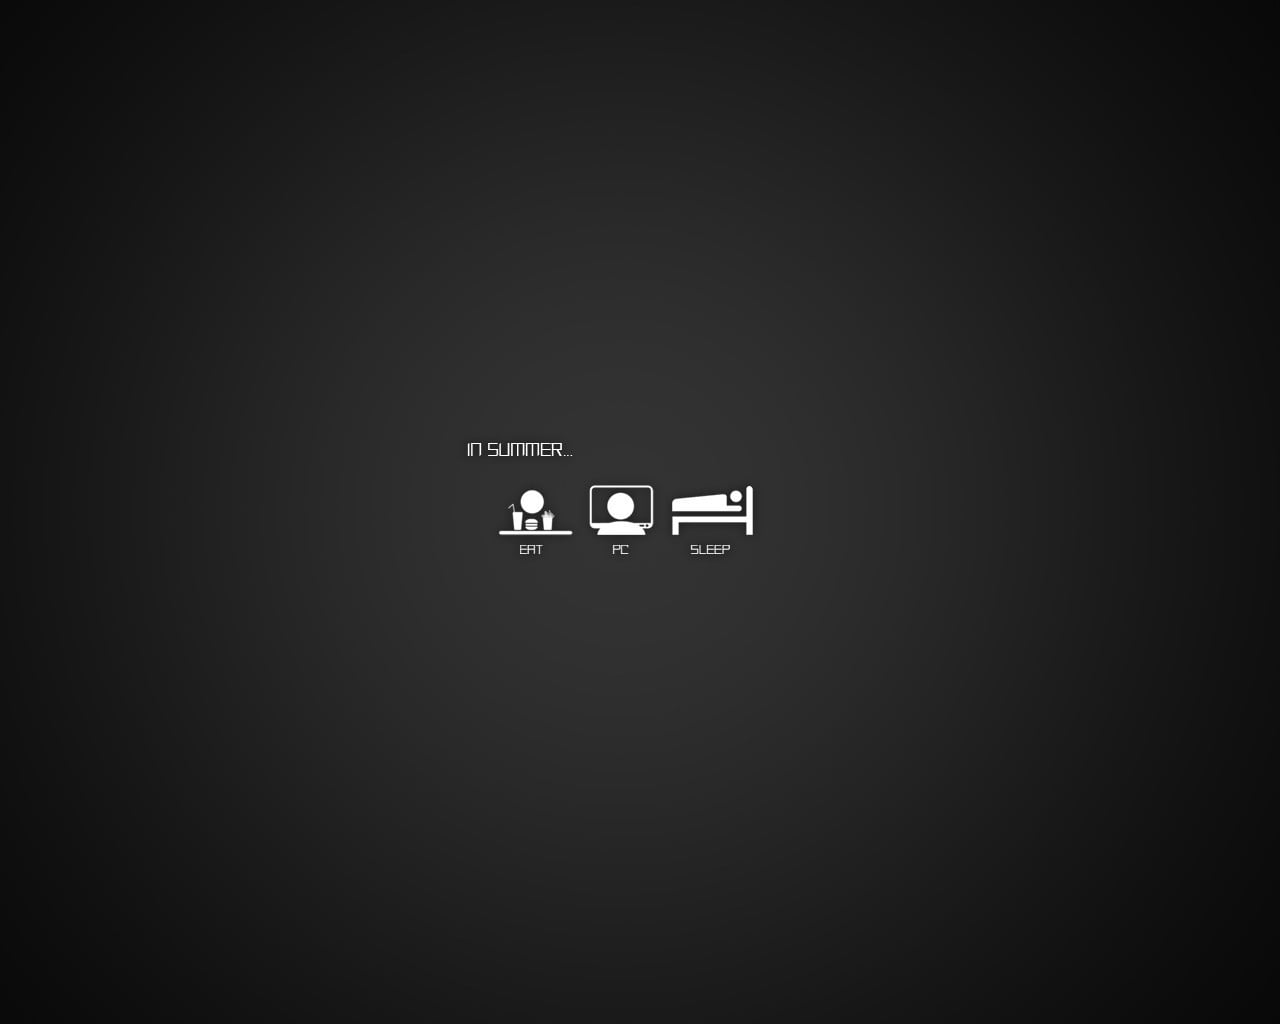 television and bed logos, text, humor, minimalism, communication